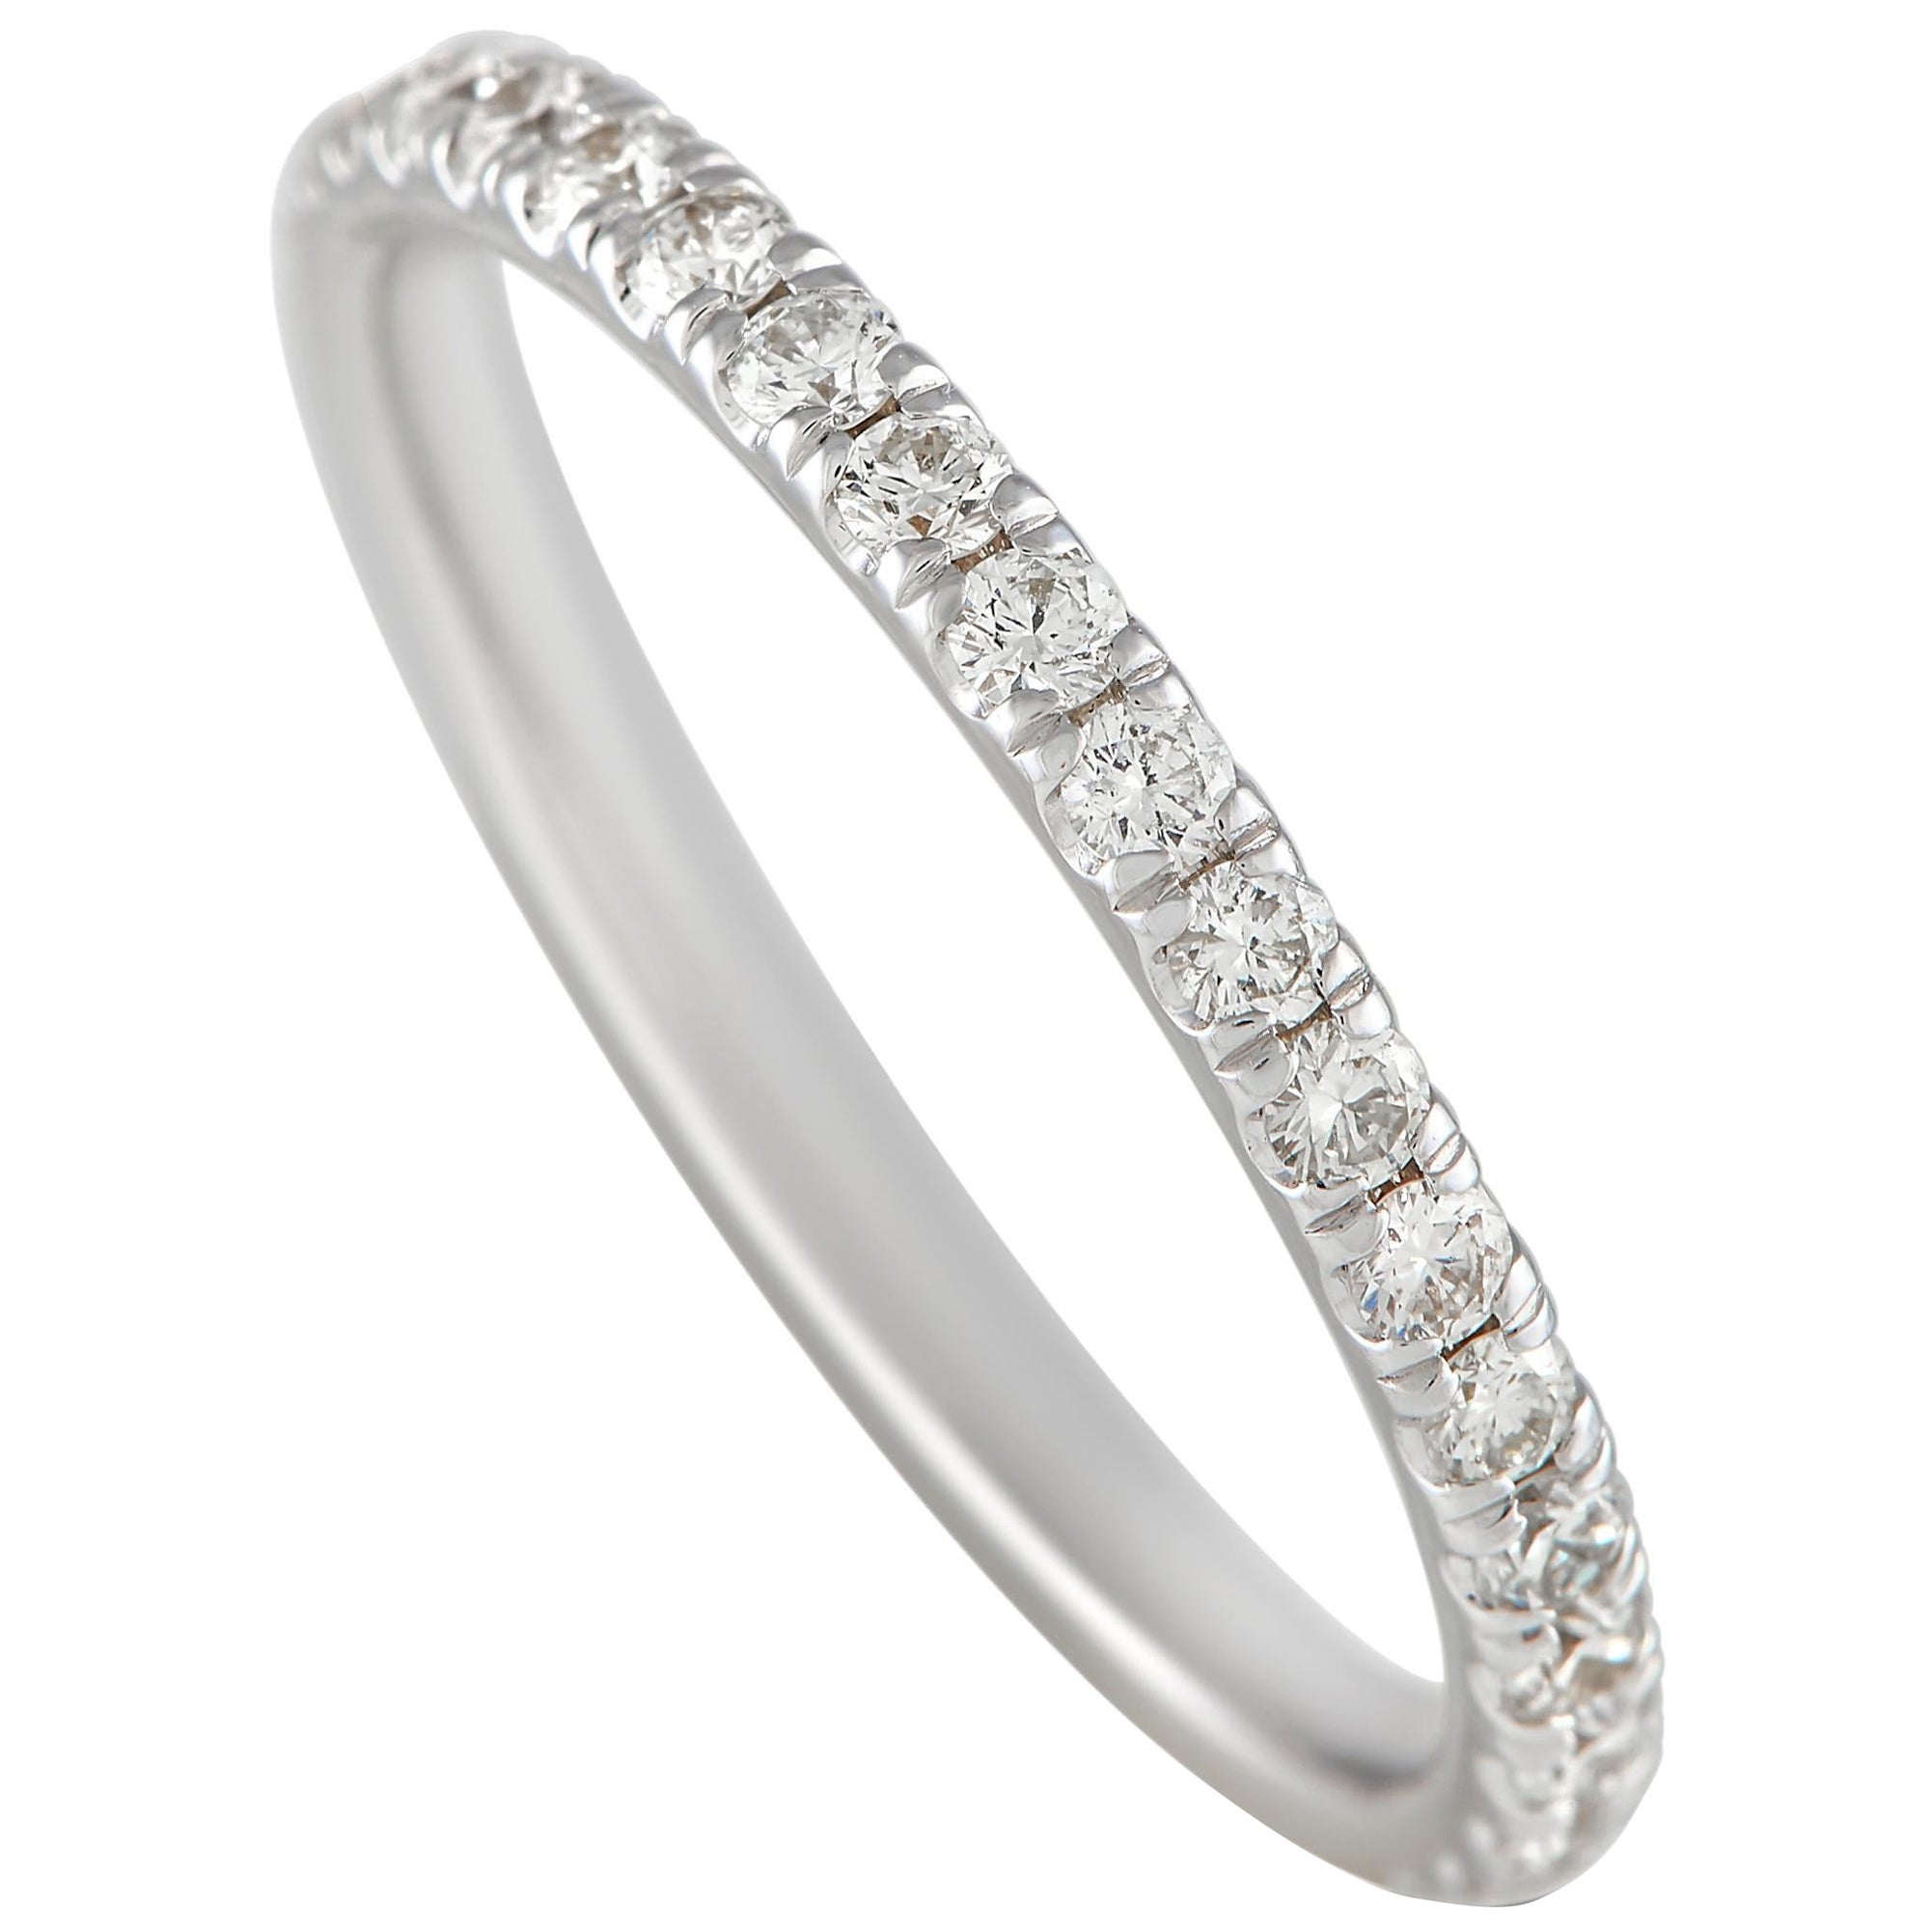 LB Exclusive 14k White Gold 0.65ct Diamond Eternity Band Ring